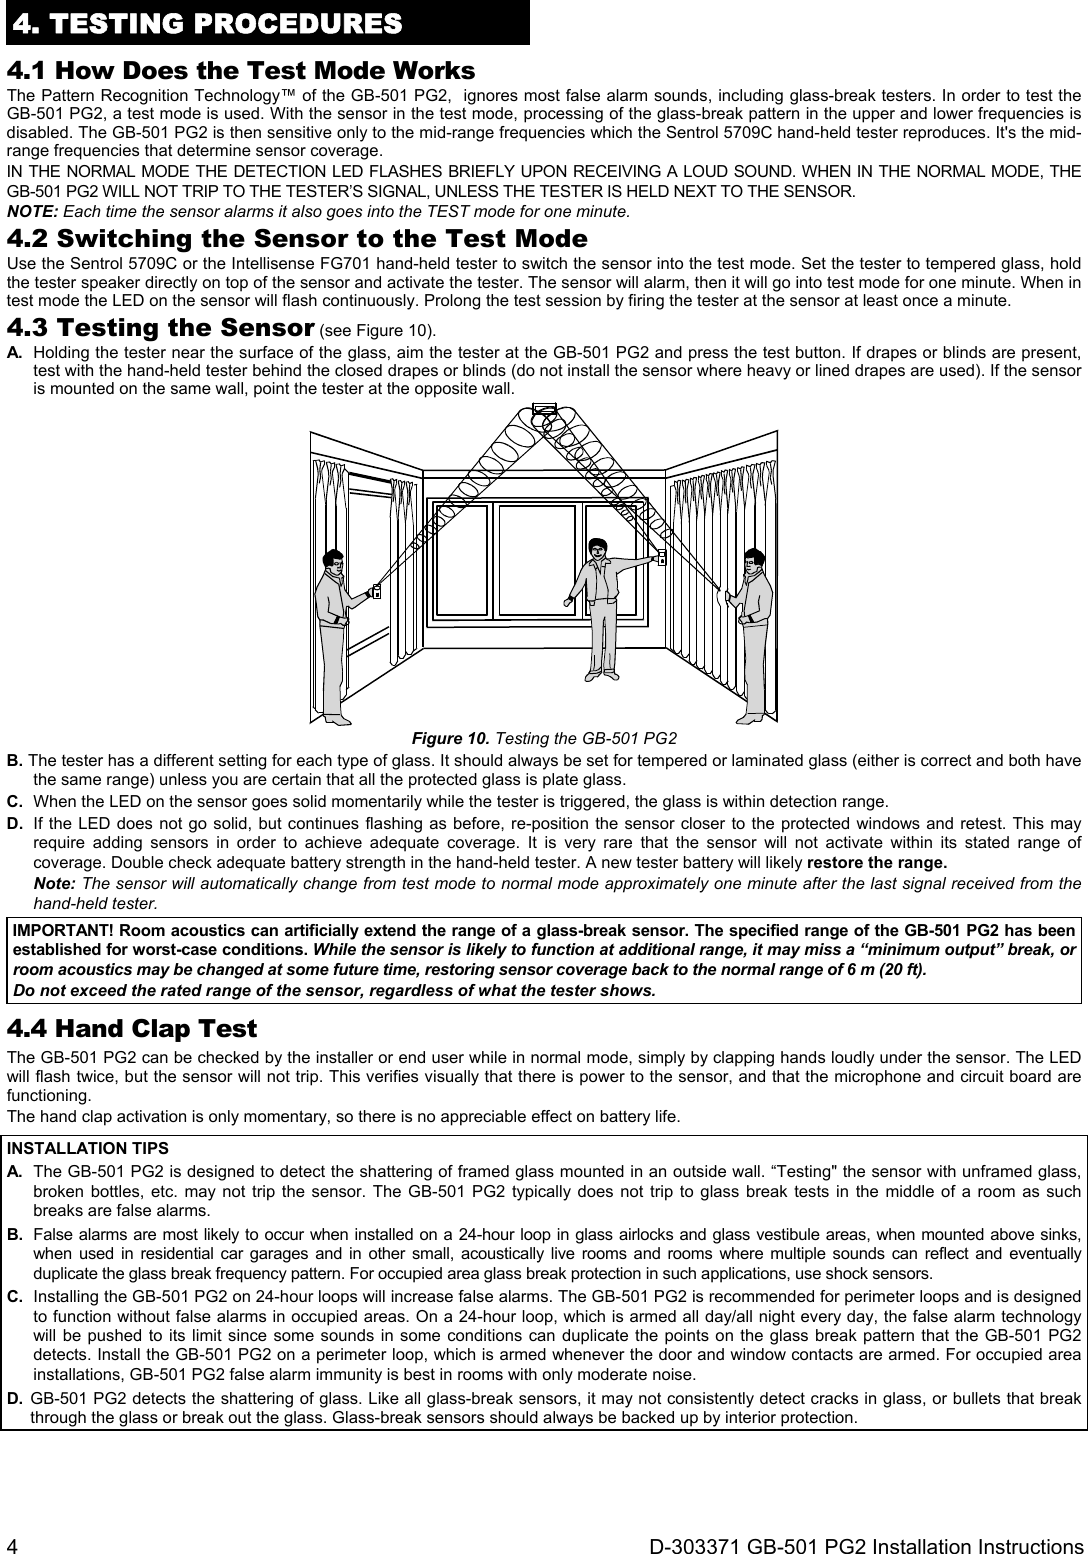 4  D-303371 GB-501 PG2 Installation Instructions 4. TESTING PROCEDURES 4.1 How Does the Test Mode Works The Pattern Recognition Technology™ of the GB-501 PG2,  ignores most false alarm sounds, including glass-break testers. In order to test the GB-501 PG2, a test mode is used. With the sensor in the test mode, processing of the glass-break pattern in the upper and lower frequencies is disabled. The GB-501 PG2 is then sensitive only to the mid-range frequencies which the Sentrol 5709C hand-held tester reproduces. It&apos;s the mid-range frequencies that determine sensor coverage. IN THE NORMAL MODE THE DETECTION LED FLASHES BRIEFLY UPON RECEIVING A LOUD SOUND. WHEN IN THE NORMAL MODE, THE GB-501 PG2 WILL NOT TRIP TO THE TESTER’S SIGNAL, UNLESS THE TESTER IS HELD NEXT TO THE SENSOR. NOTE: Each time the sensor alarms it also goes into the TEST mode for one minute. 4.2 Switching the Sensor to the Test Mode Use the Sentrol 5709C or the Intellisense FG701 hand-held tester to switch the sensor into the test mode. Set the tester to tempered glass, hold the tester speaker directly on top of the sensor and activate the tester. The sensor will alarm, then it will go into test mode for one minute. When in test mode the LED on the sensor will flash continuously. Prolong the test session by firing the tester at the sensor at least once a minute. 4.3 Testing the Sensor (see Figure 10). A.  Holding the tester near the surface of the glass, aim the tester at the GB-501 PG2 and press the test button. If drapes or blinds are present, test with the hand-held tester behind the closed drapes or blinds (do not install the sensor where heavy or lined drapes are used). If the sensor is mounted on the same wall, point the tester at the opposite wall.  Figure 10. Testing the GB-501 PG2 B. The tester has a different setting for each type of glass. It should always be set for tempered or laminated glass (either is correct and both have the same range) unless you are certain that all the protected glass is plate glass. C.  When the LED on the sensor goes solid momentarily while the tester is triggered, the glass is within detection range. D.  If the LED does not go solid, but continues flashing as before, re-position the sensor closer to the protected windows and retest. This may require adding sensors in order to achieve adequate coverage. It is very rare that the sensor will not activate within its stated range of coverage. Double check adequate battery strength in the hand-held tester. A new tester battery will likely restore the range.  Note: The sensor will automatically change from test mode to normal mode approximately one minute after the last signal received from the hand-held tester. IMPORTANT! Room acoustics can artificially extend the range of a glass-break sensor. The specified range of the GB-501 PG2 has been established for worst-case conditions. While the sensor is likely to function at additional range, it may miss a “minimum output” break, or room acoustics may be changed at some future time, restoring sensor coverage back to the normal range of 6 m (20 ft). Do not exceed the rated range of the sensor, regardless of what the tester shows. 4.4 Hand Clap Test The GB-501 PG2 can be checked by the installer or end user while in normal mode, simply by clapping hands loudly under the sensor. The LED will flash twice, but the sensor will not trip. This verifies visually that there is power to the sensor, and that the microphone and circuit board are functioning. The hand clap activation is only momentary, so there is no appreciable effect on battery life. INSTALLATION TIPS A.  The GB-501 PG2 is designed to detect the shattering of framed glass mounted in an outside wall. “Testing&quot; the sensor with unframed glass, broken bottles, etc. may not trip the sensor. The GB-501 PG2 typically does not trip to glass break tests in the middle of a room as such breaks are false alarms. B.  False alarms are most likely to occur when installed on a 24-hour loop in glass airlocks and glass vestibule areas, when mounted above sinks, when used in residential car garages and in other small, acoustically live rooms and rooms where multiple sounds can reflect and eventually duplicate the glass break frequency pattern. For occupied area glass break protection in such applications, use shock sensors. C.  Installing the GB-501 PG2 on 24-hour loops will increase false alarms. The GB-501 PG2 is recommended for perimeter loops and is designed to function without false alarms in occupied areas. On a 24-hour loop, which is armed all day/all night every day, the false alarm technology will be pushed to its limit since some sounds in some conditions can duplicate the points on the glass break pattern that the GB-501 PG2 detects. Install the GB-501 PG2 on a perimeter loop, which is armed whenever the door and window contacts are armed. For occupied area installations, GB-501 PG2 false alarm immunity is best in rooms with only moderate noise. D. GB-501 PG2 detects the shattering of glass. Like all glass-break sensors, it may not consistently detect cracks in glass, or bullets that break through the glass or break out the glass. Glass-break sensors should always be backed up by interior protection.   